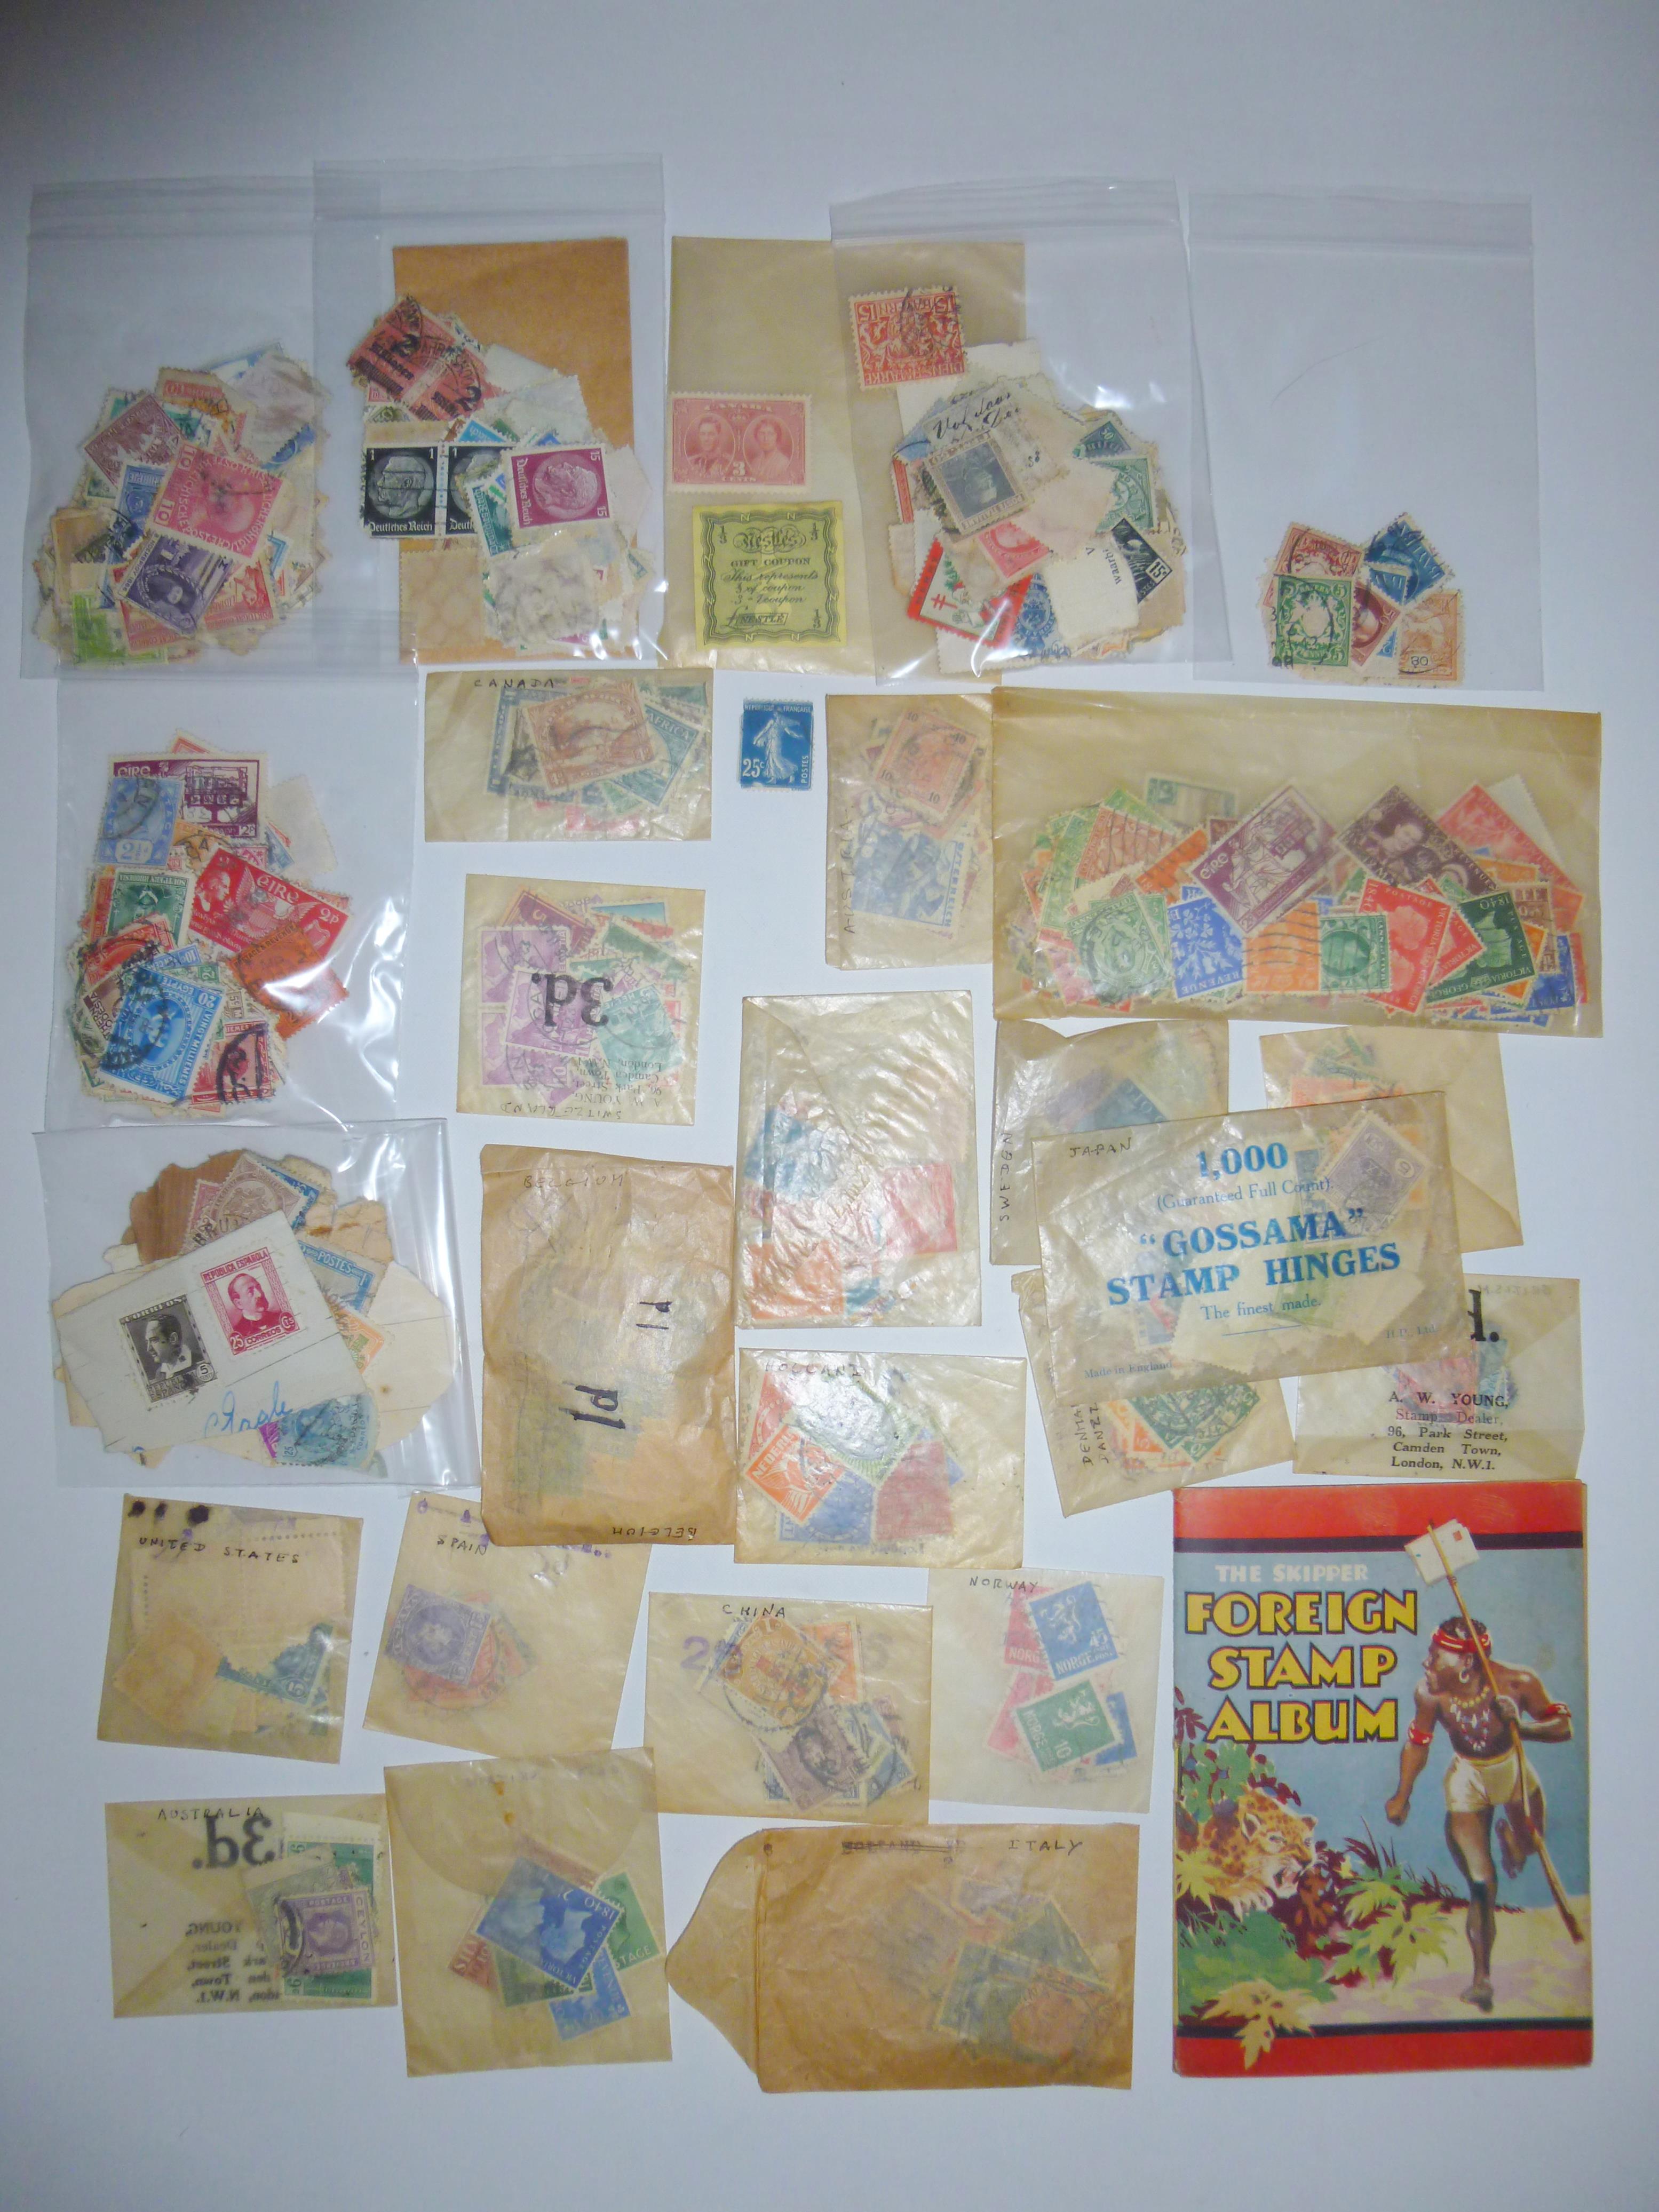 STAMPS, VARIOUS PRINTS AND NEGATIVES, TRAM TICKETS TOGETHER WITH STAMP COLLECTING EPHEMERA